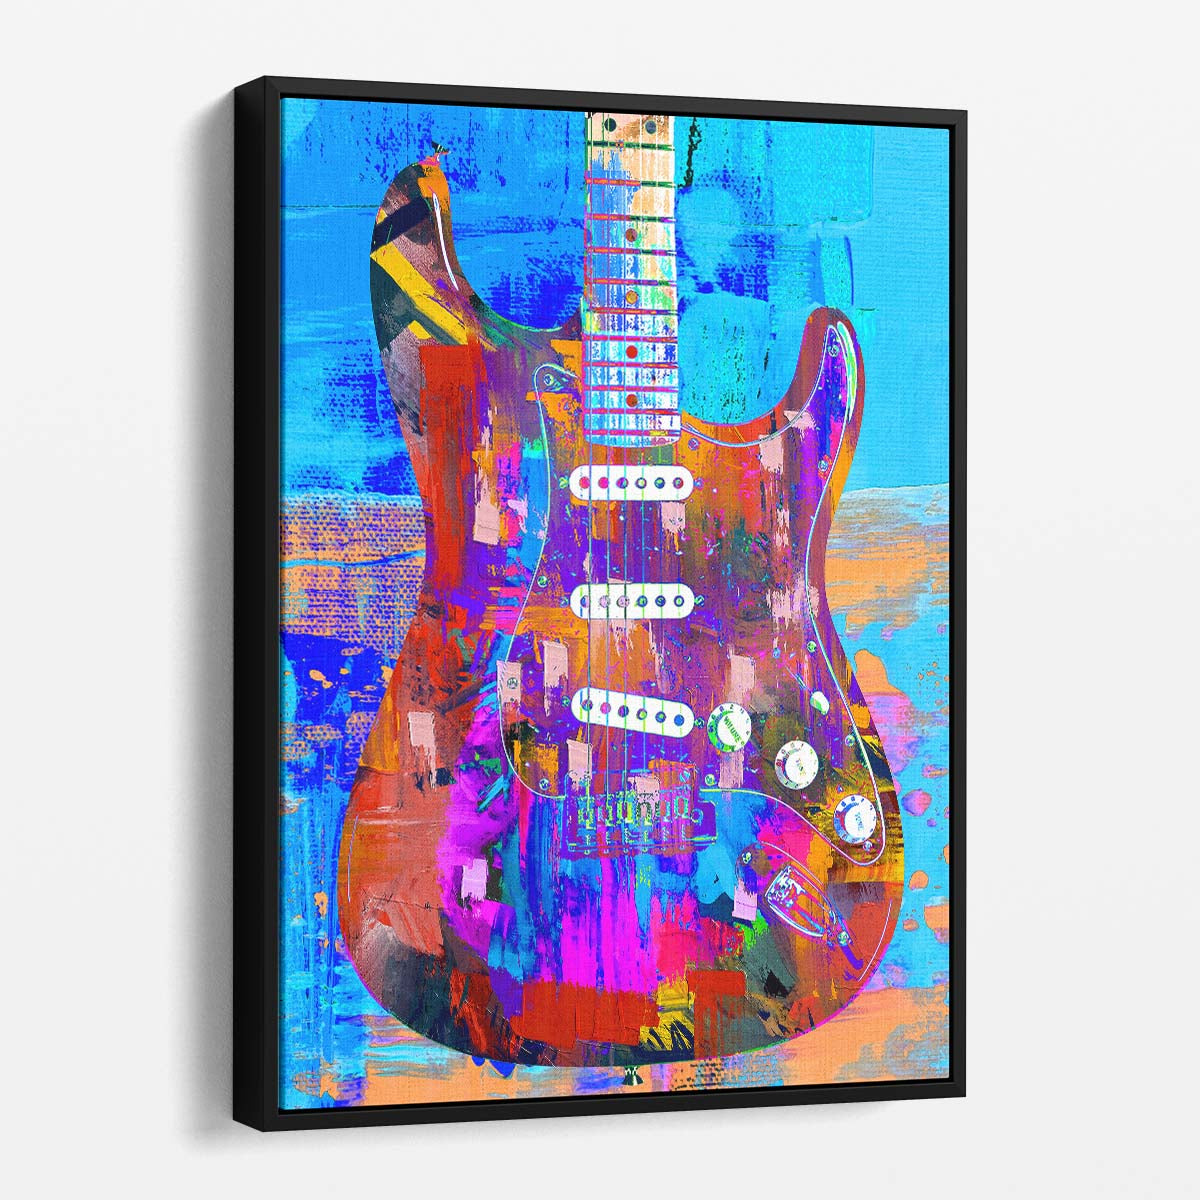 Painted Stratocaster Electric Guitar Wall Art by Luxuriance Designs. Made in USA.